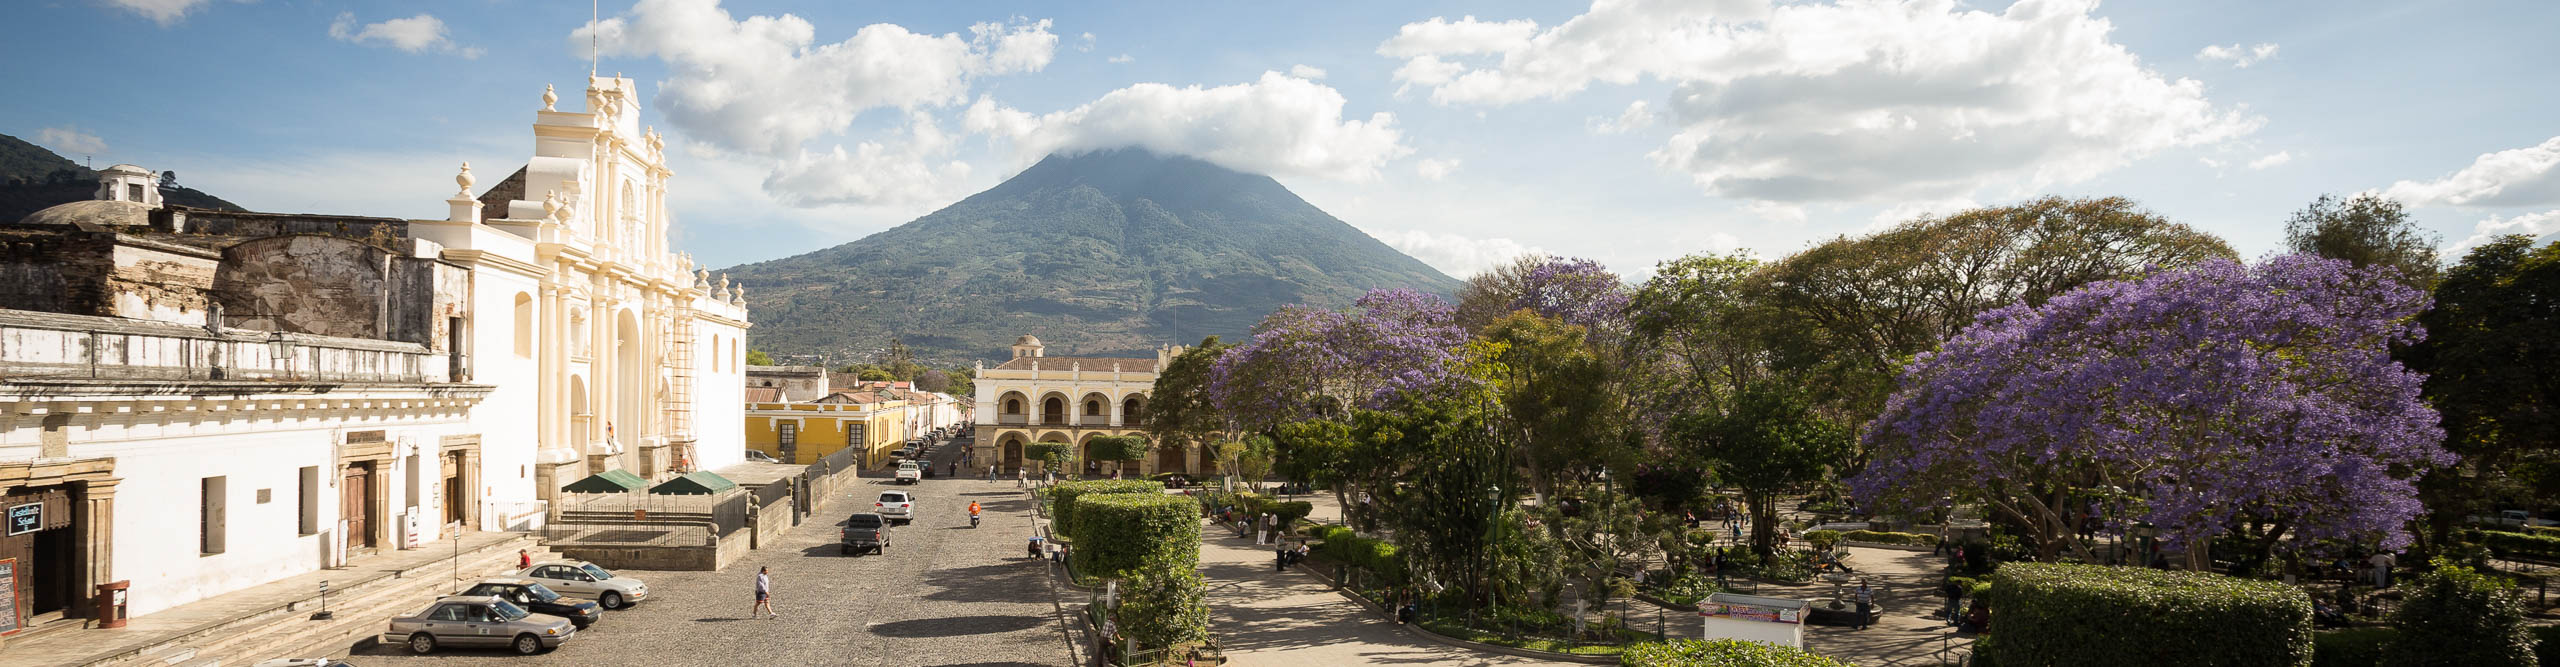 Town square in Antigua with mountain in the distance on a sunny day in Guatemala 